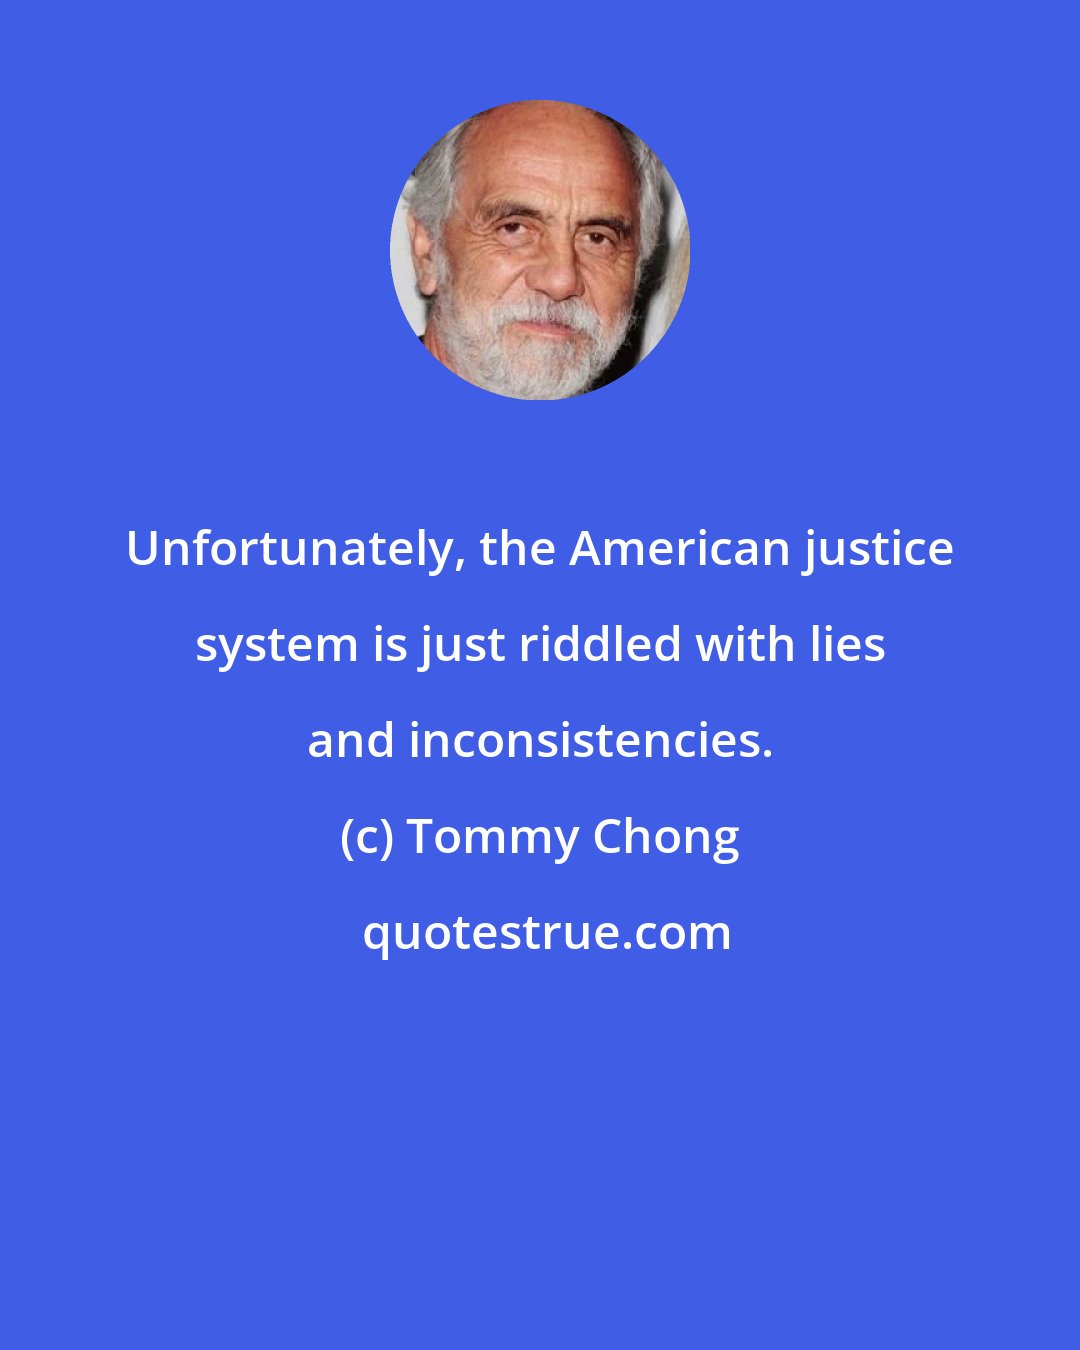 Tommy Chong: Unfortunately, the American justice system is just riddled with lies and inconsistencies.